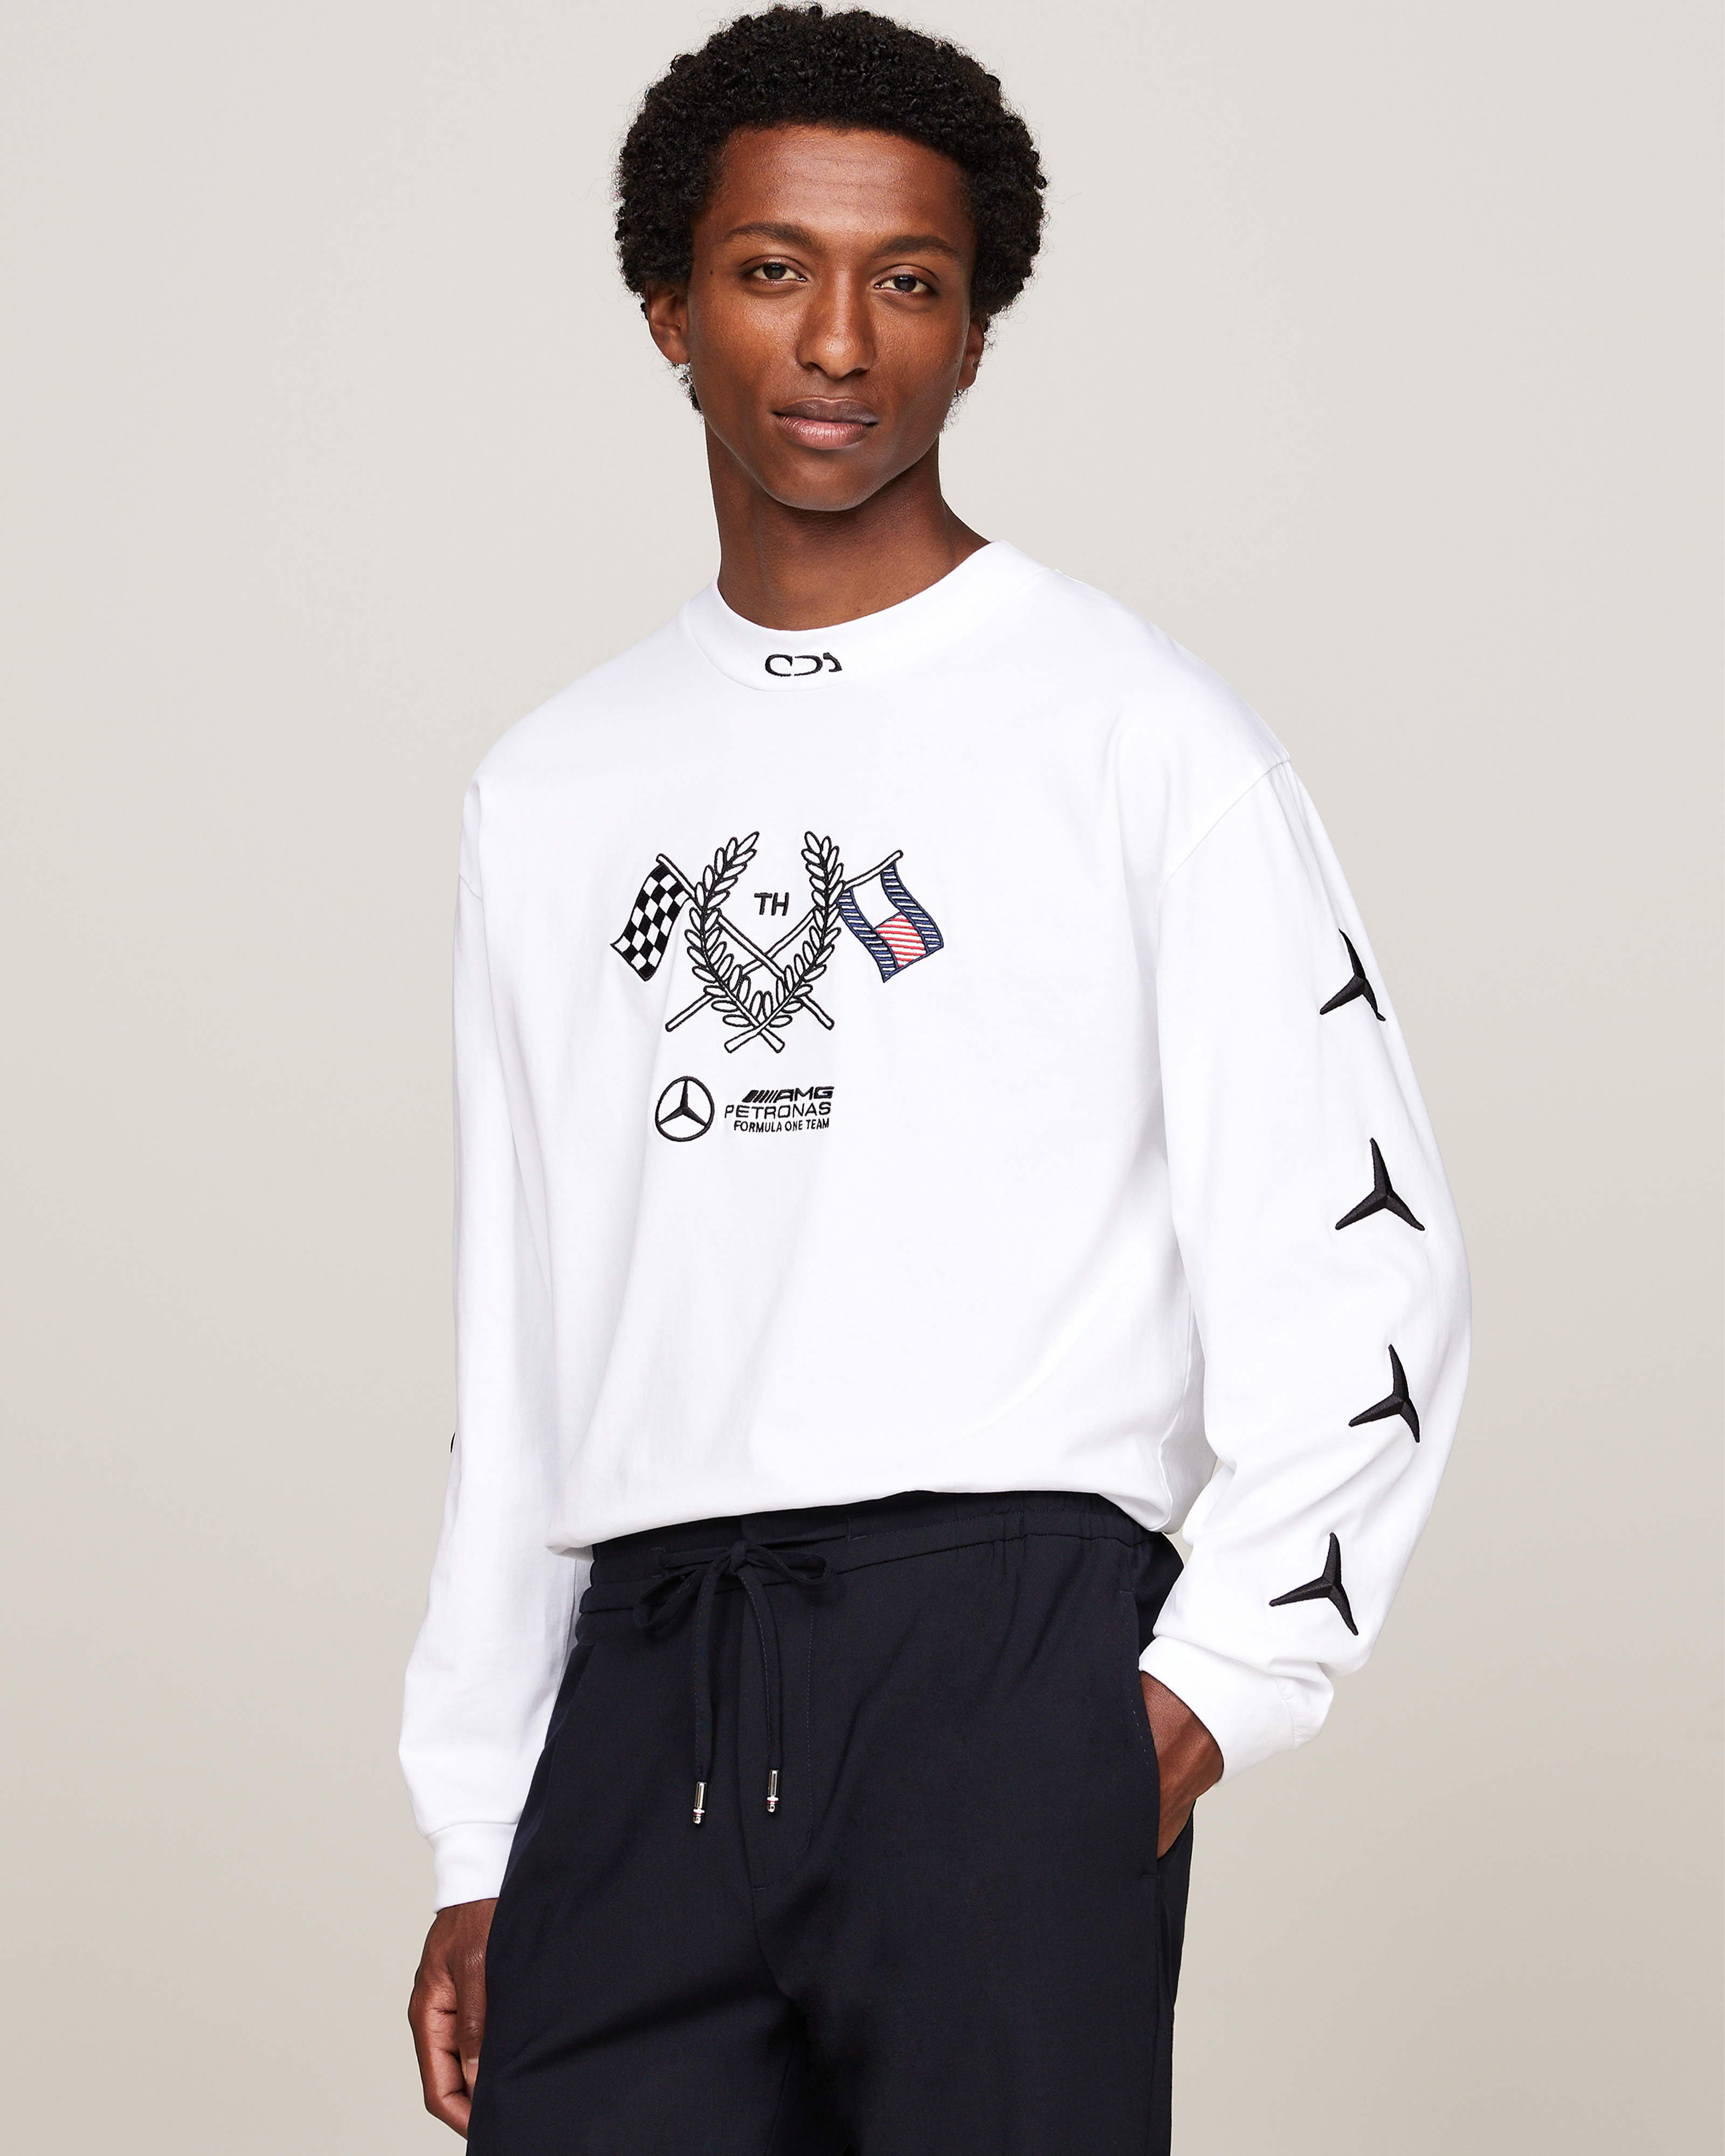 Tommy x Mercedes-AMG F1 x Clarence Ruth Longsleeve Tee White